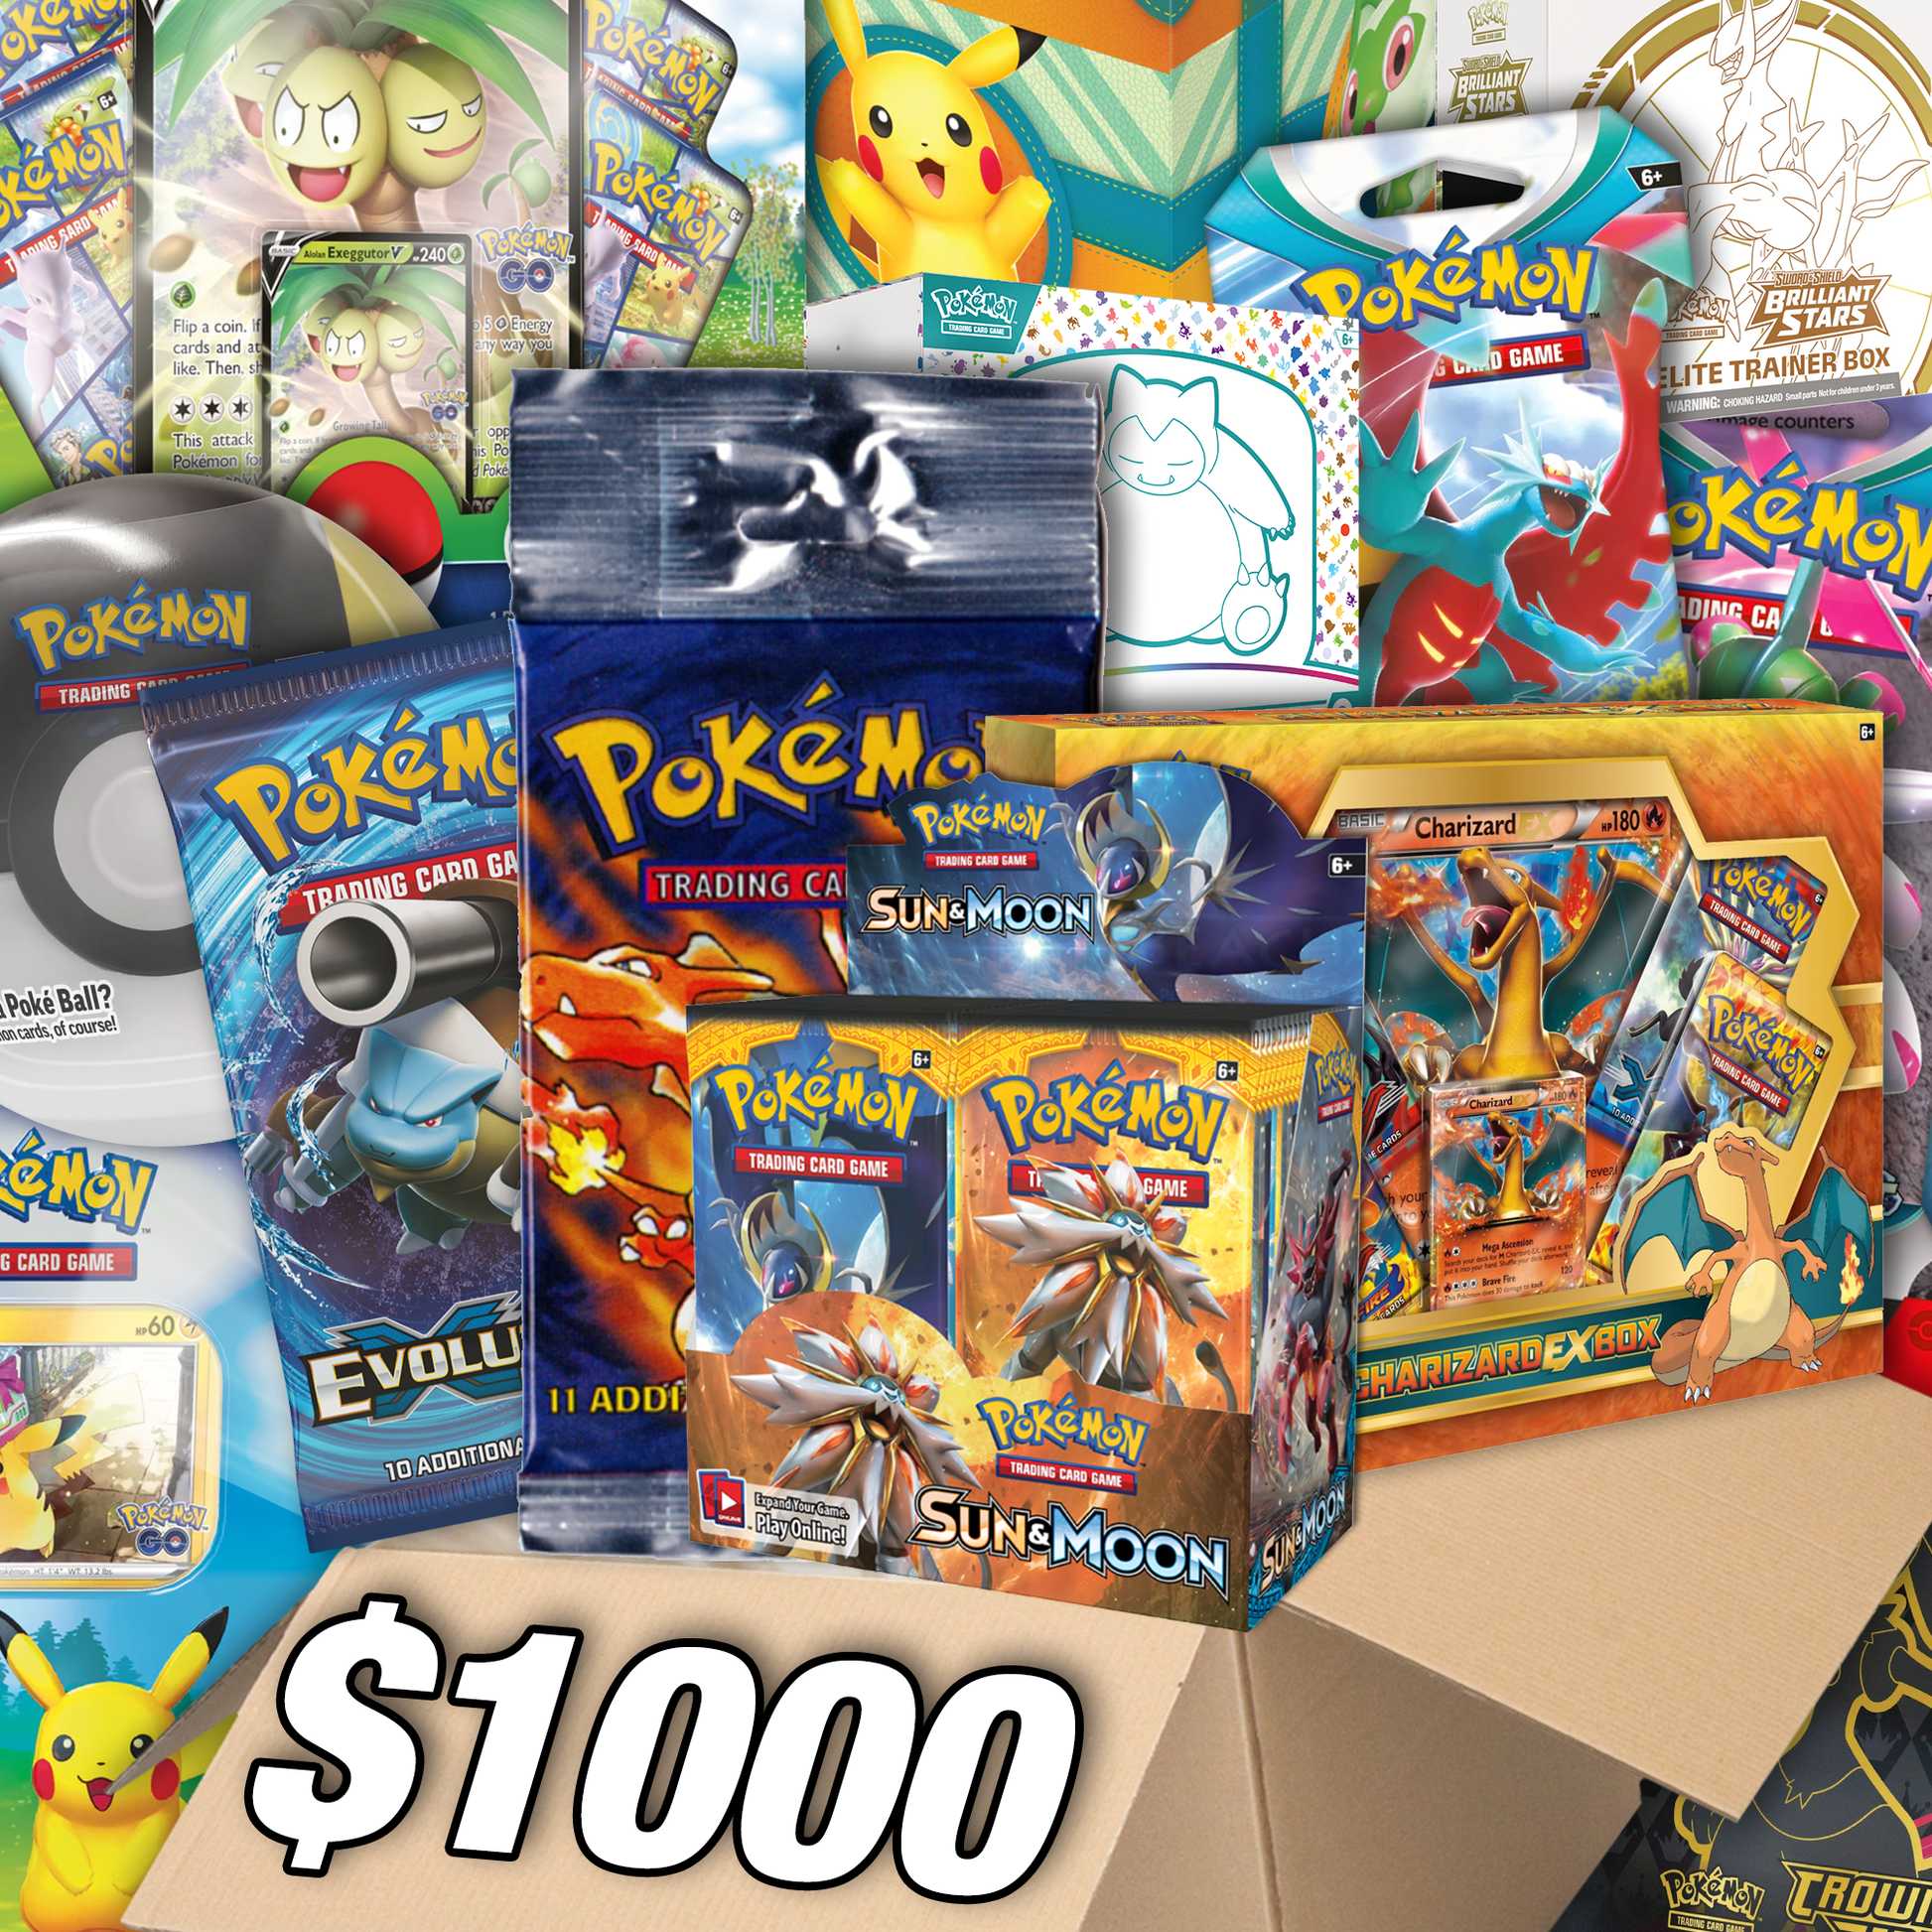 The Pokemon Card $1000 Box! - Assorted Pokémon Trading Cards - Premier Trading Cards